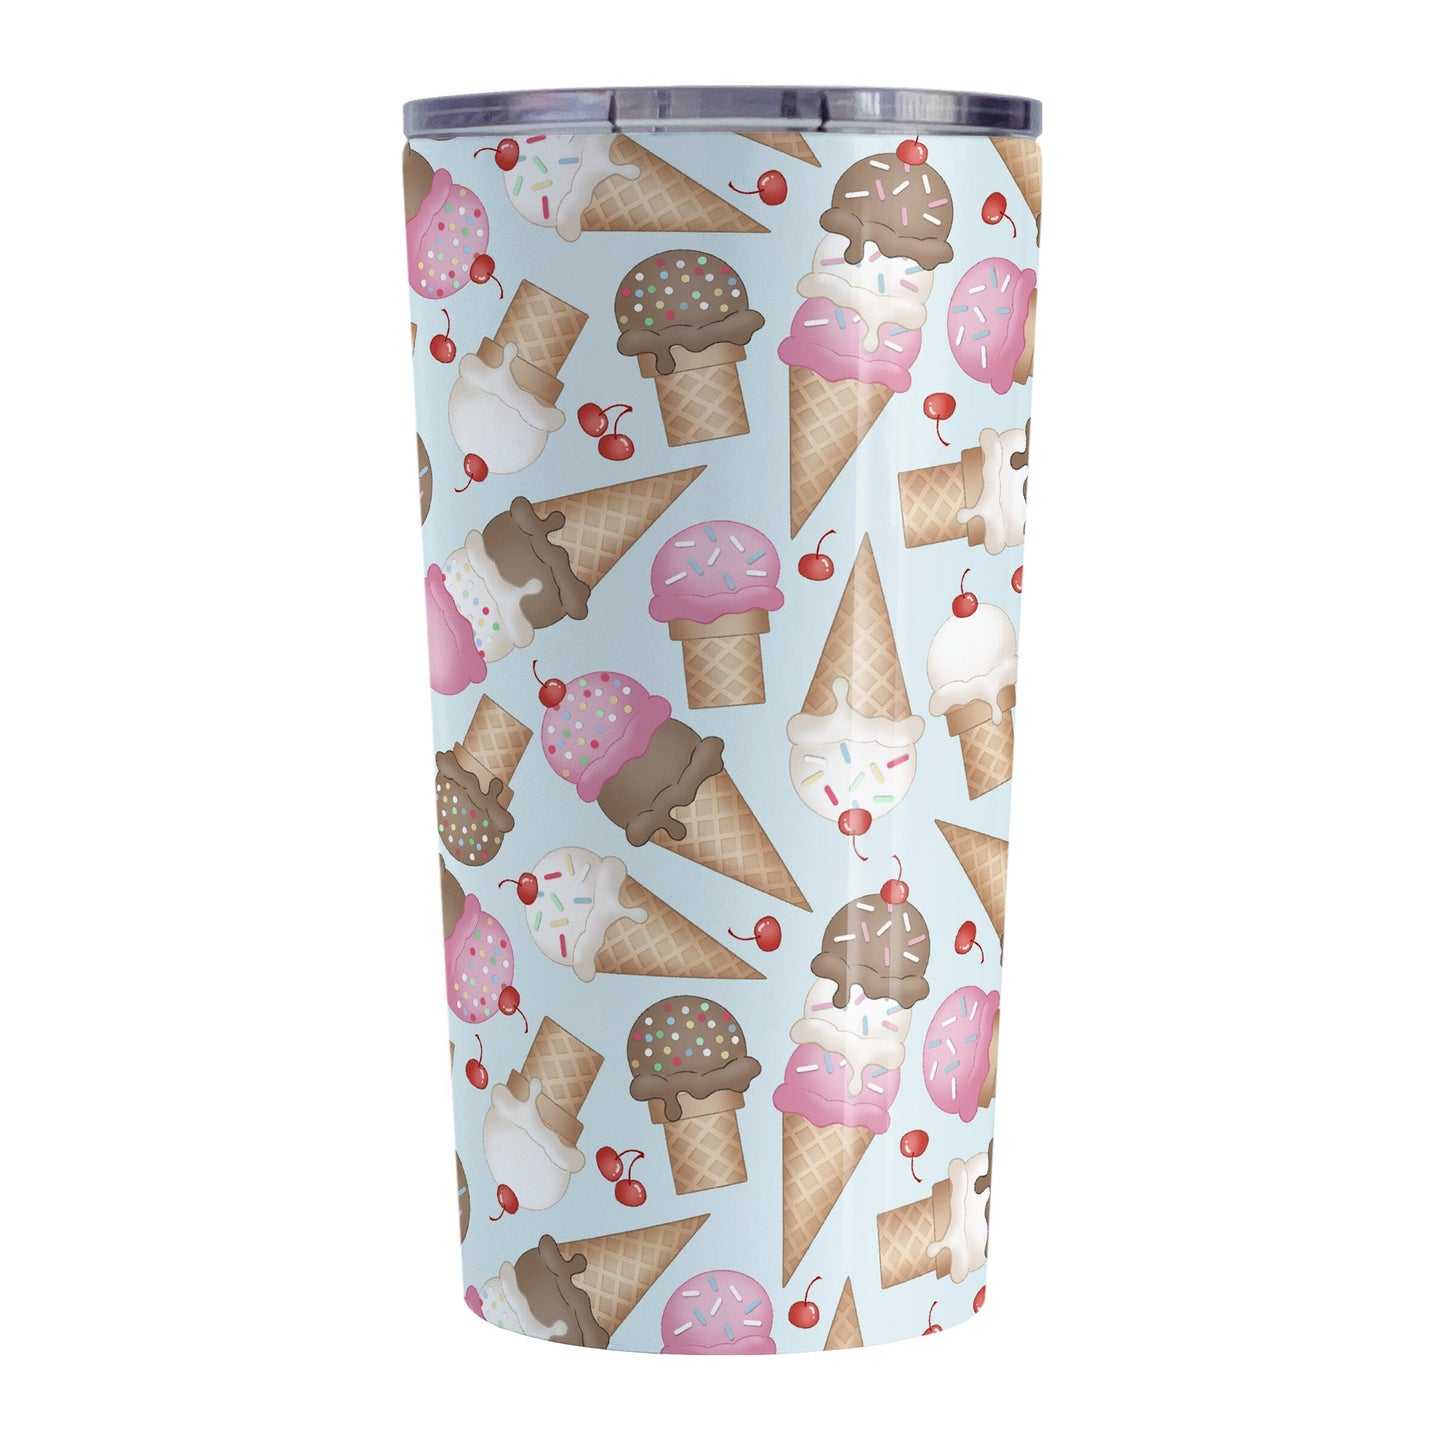 Ice Cream Cones Pattern Tumbler Cup (20oz) at Amy's Coffee Mugs. A stainless steel tumbler cup printed with a design of hand-drawn ice cream cones with chocolate, strawberry, and vanilla scoops, with sprinkles and cherries, over a pale blue color, in a pattern that wraps around the cup.